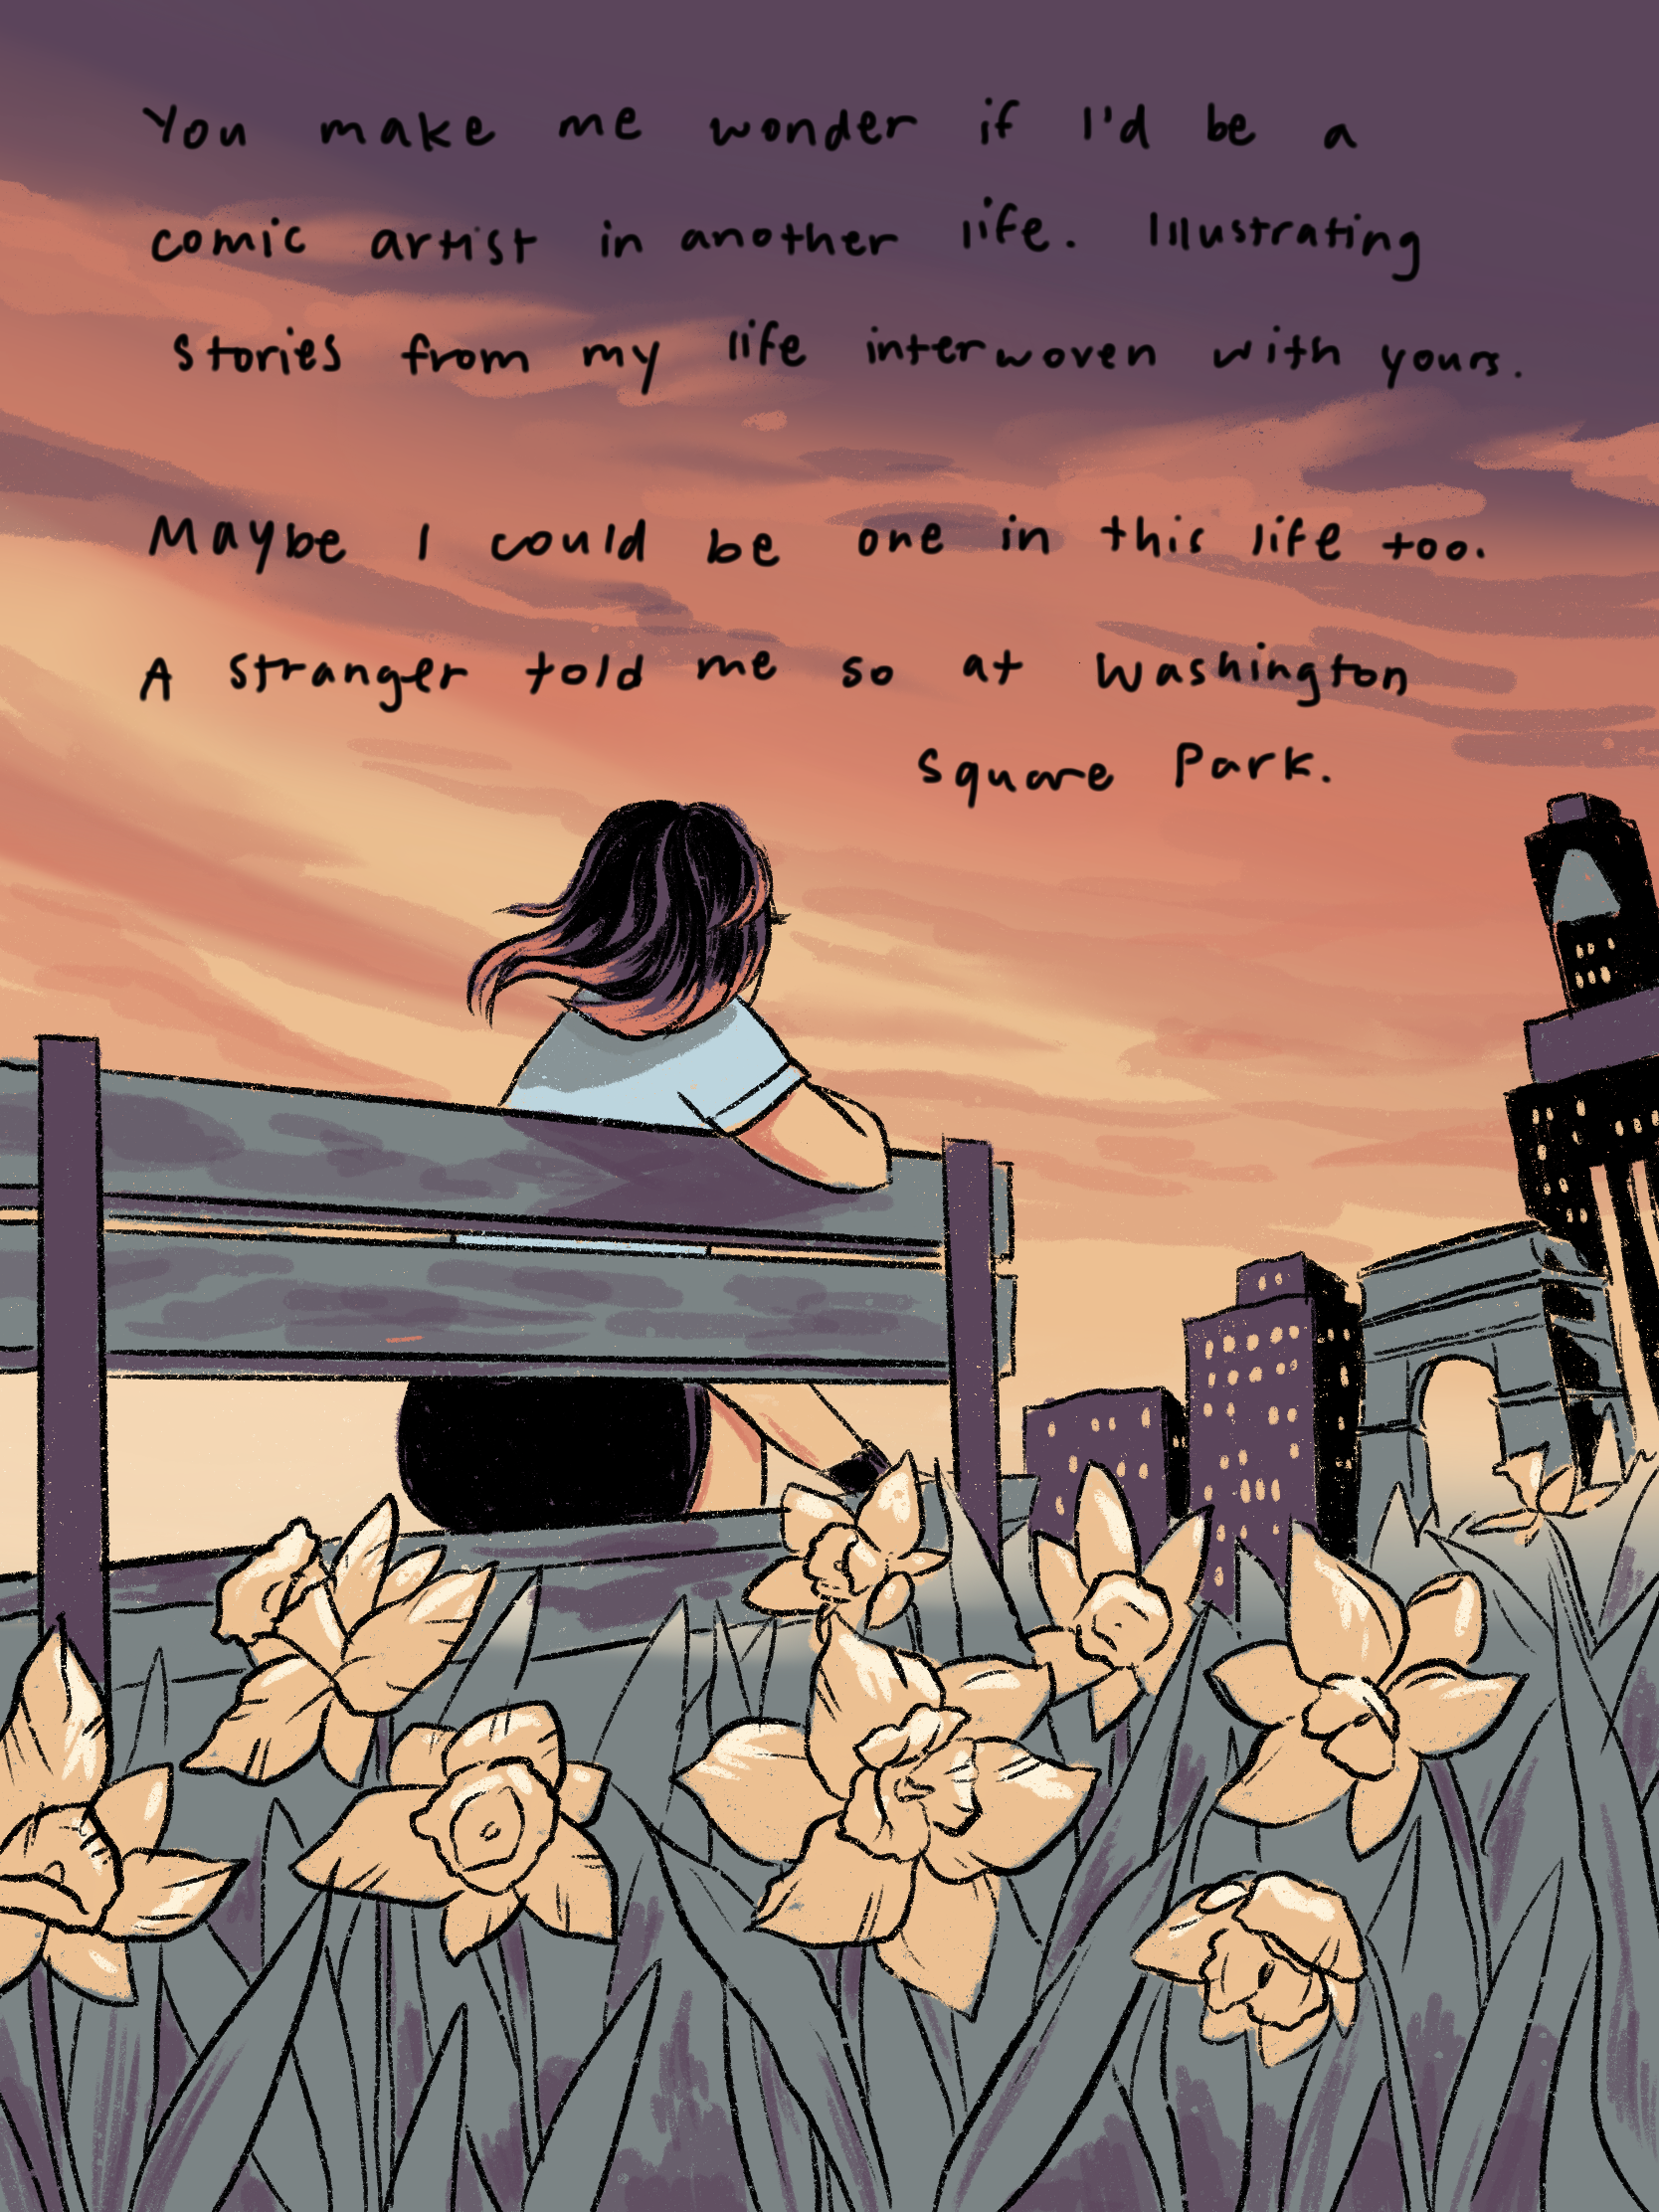 me sitting on a bench in washington square park. text reads: You make me wonder if I’d be a comic artist in another life. Illustrating stories from my life interwoven with yours. Maybe I could be one in this life too. A stranger told me so at the Washington Square Park.